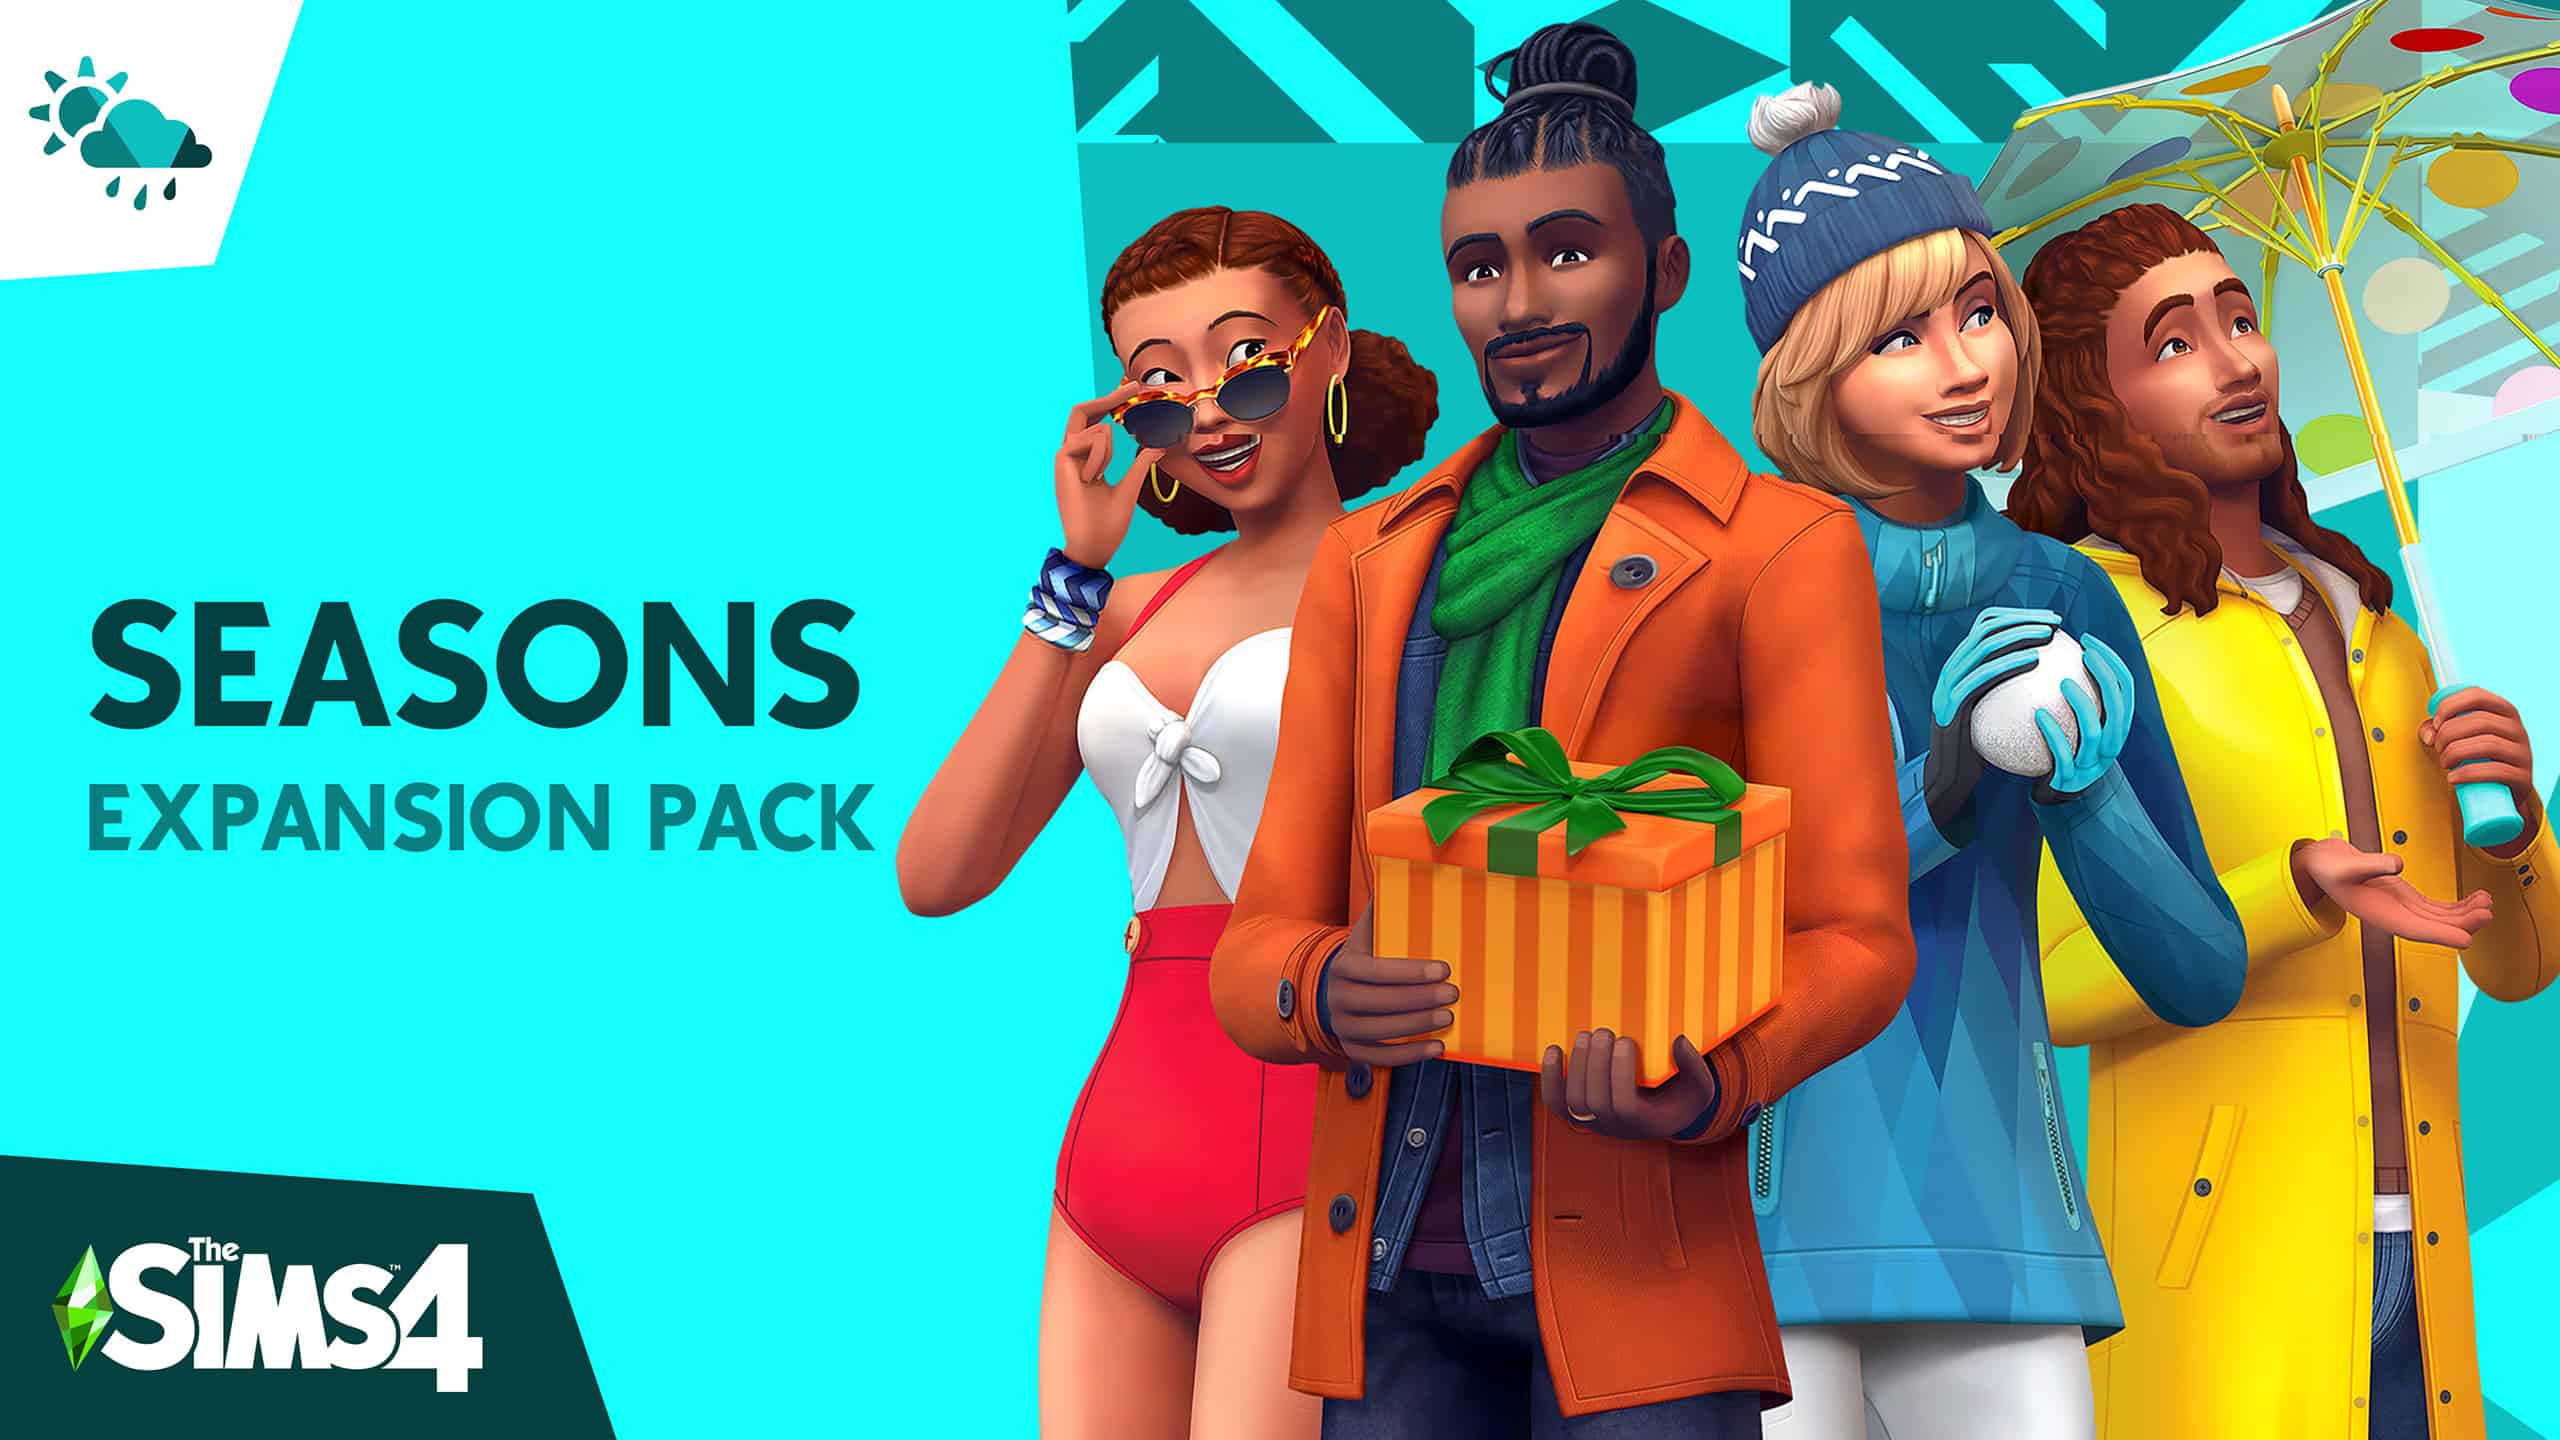 The Sims 4 cheats: Full list of Sims 4 cheat codes for PC, PS4, Xbox  consoles, and mobile